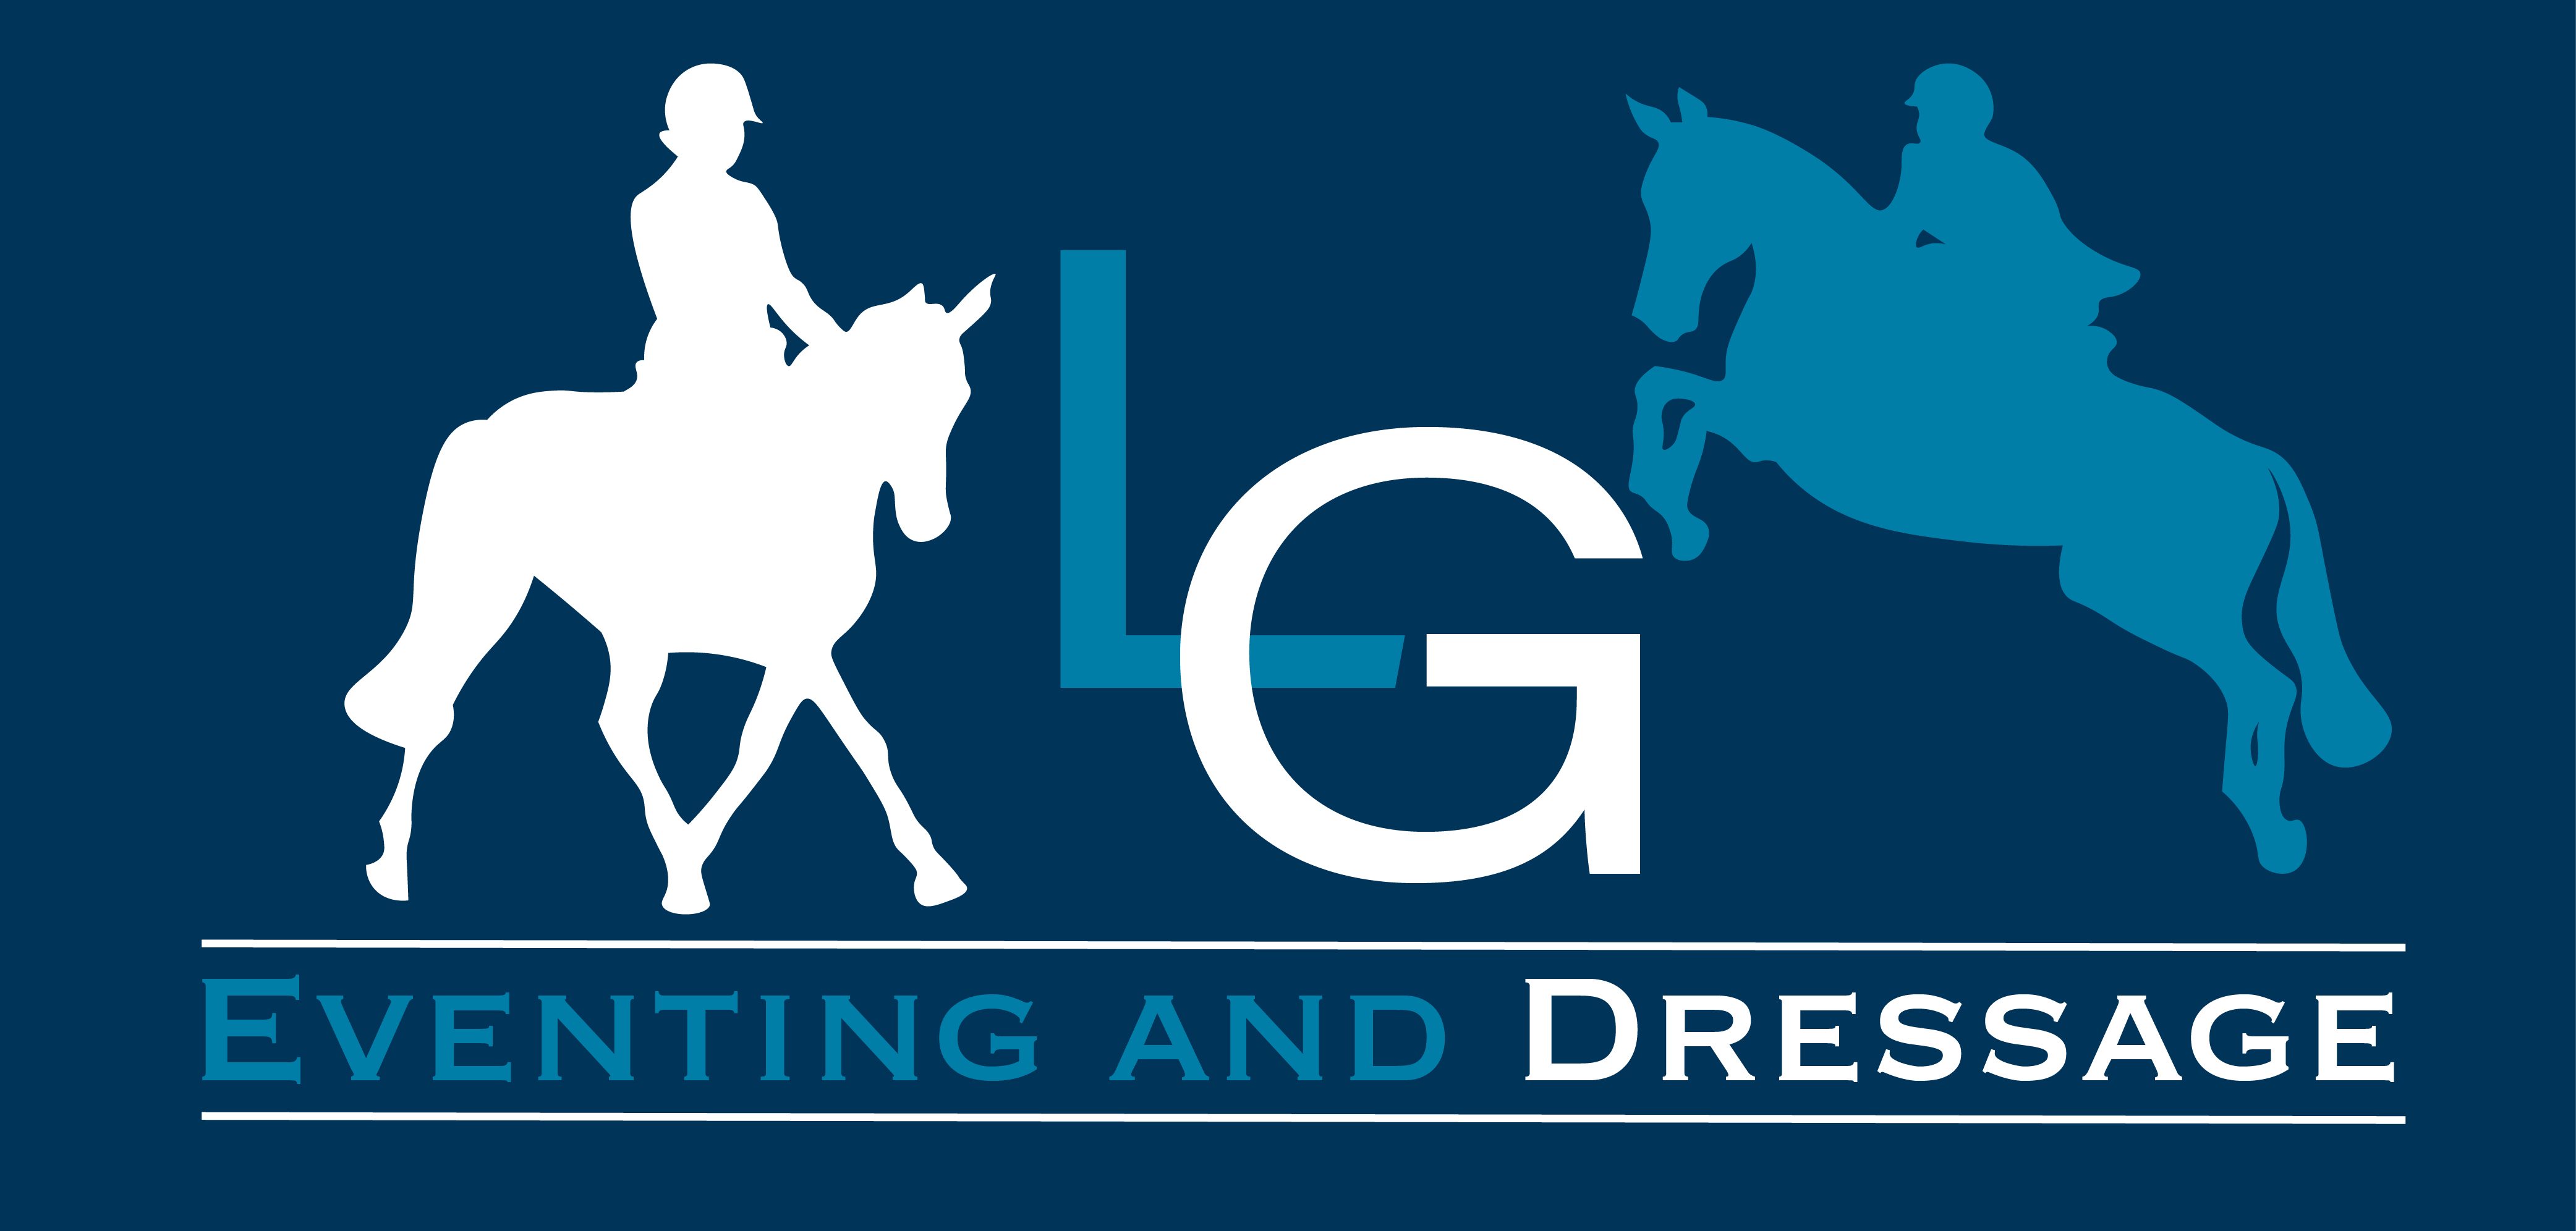 LG Eventing and Dressage